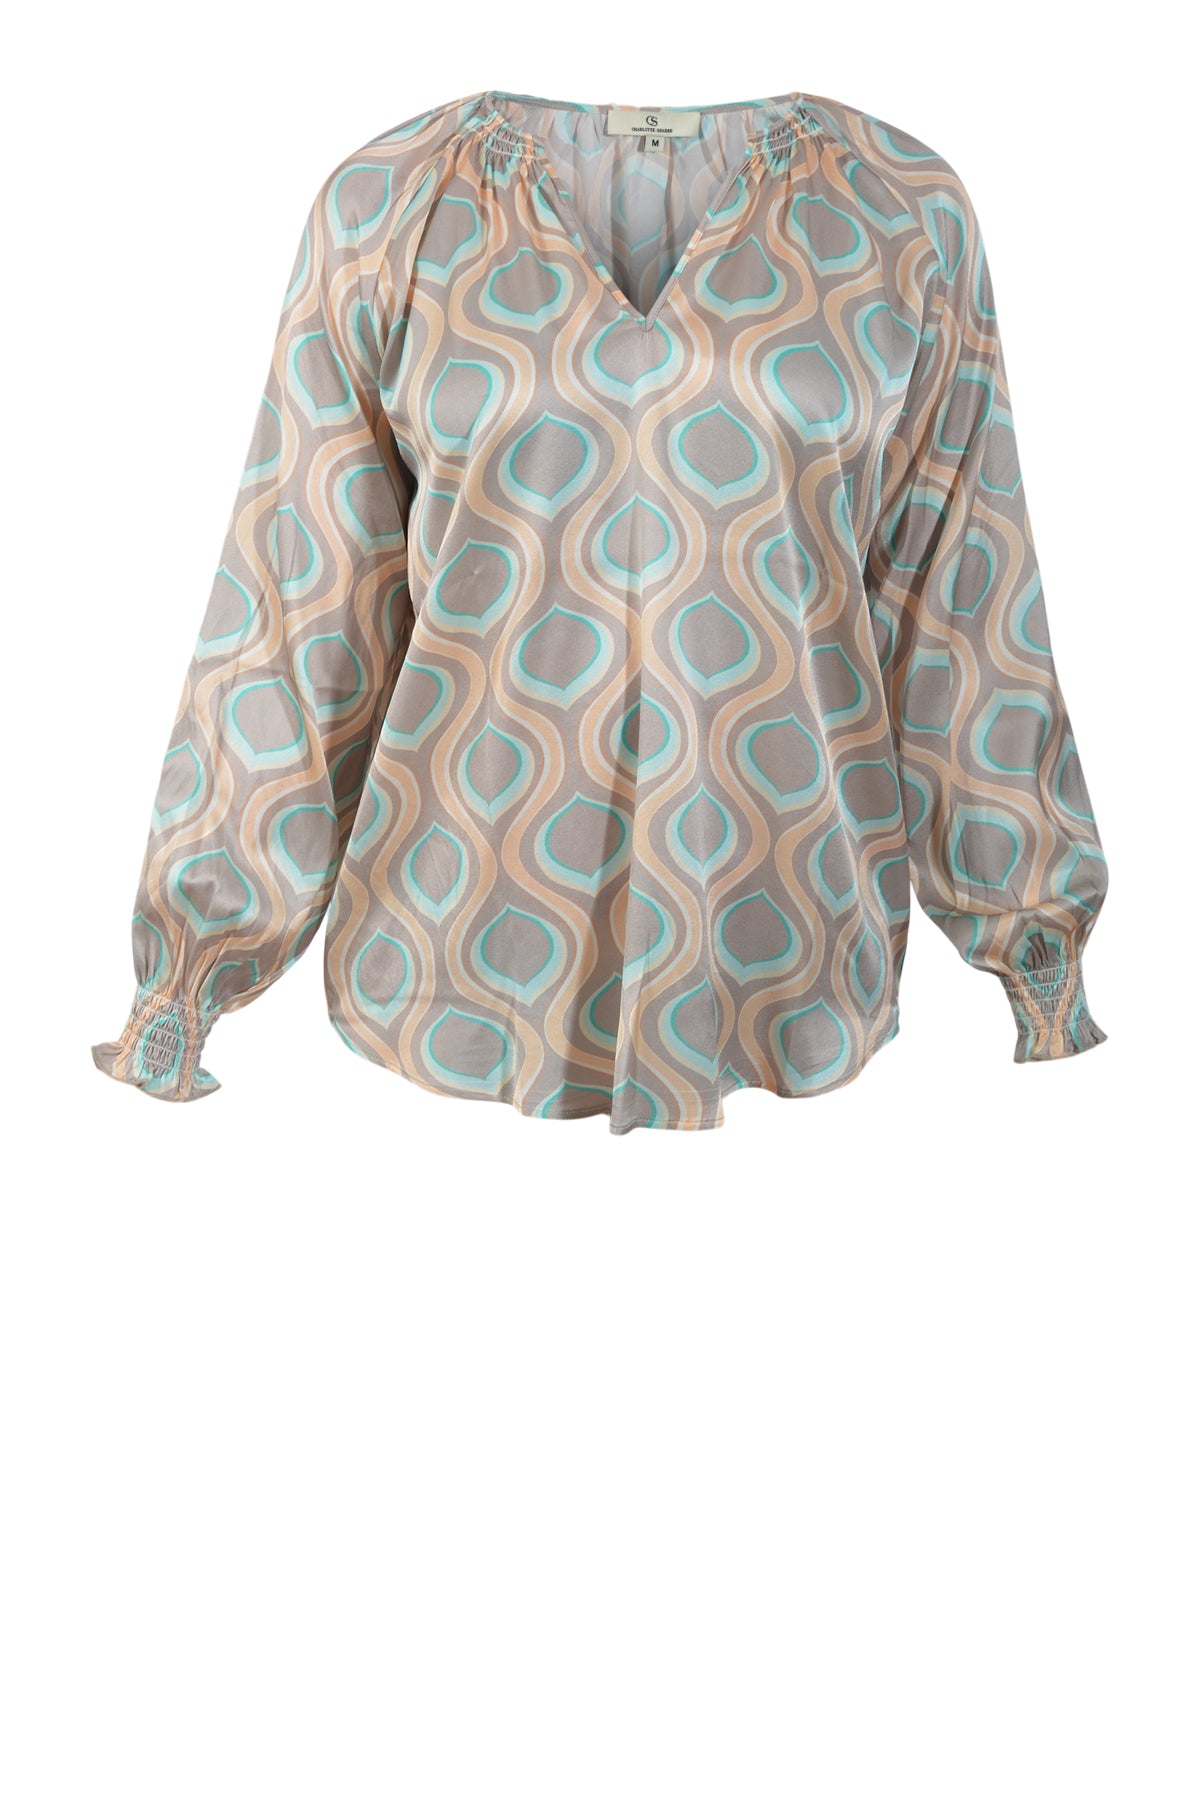 Charlotte Sparre Jammy Blouse 2907, Ollie Taupe/Blue